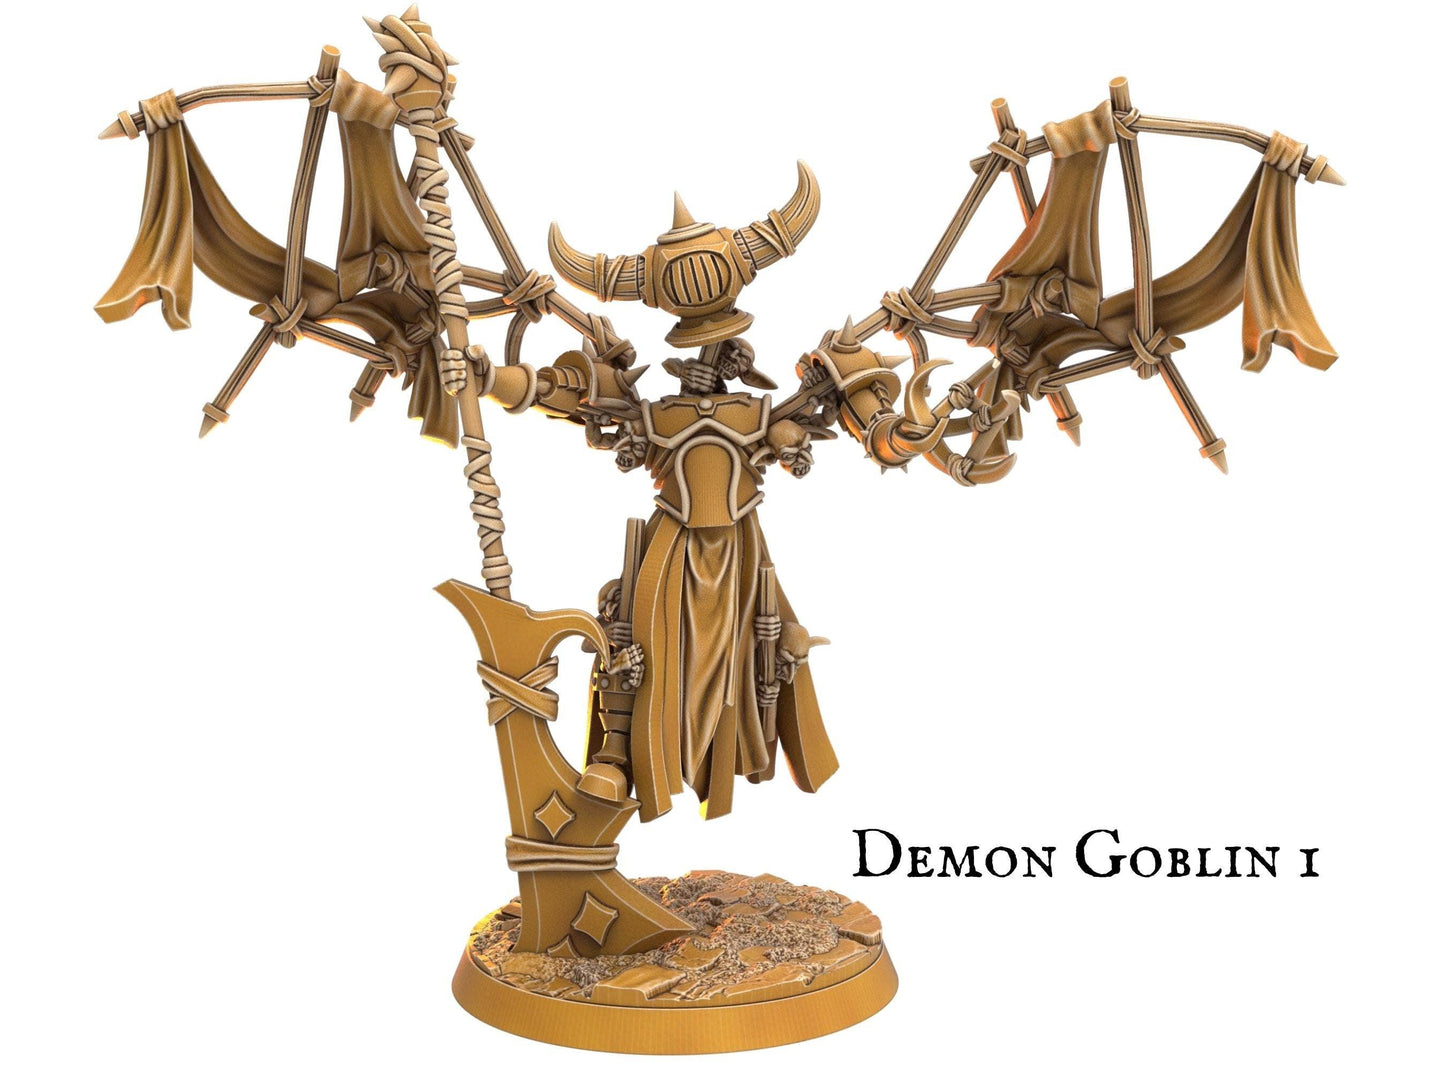 Demon Goblin Miniature - 2 Poses - 32mm scale Tabletop gaming DnD Miniature Dungeons and Dragons, dnd 5e - Plague Miniatures shop for DnD Miniatures